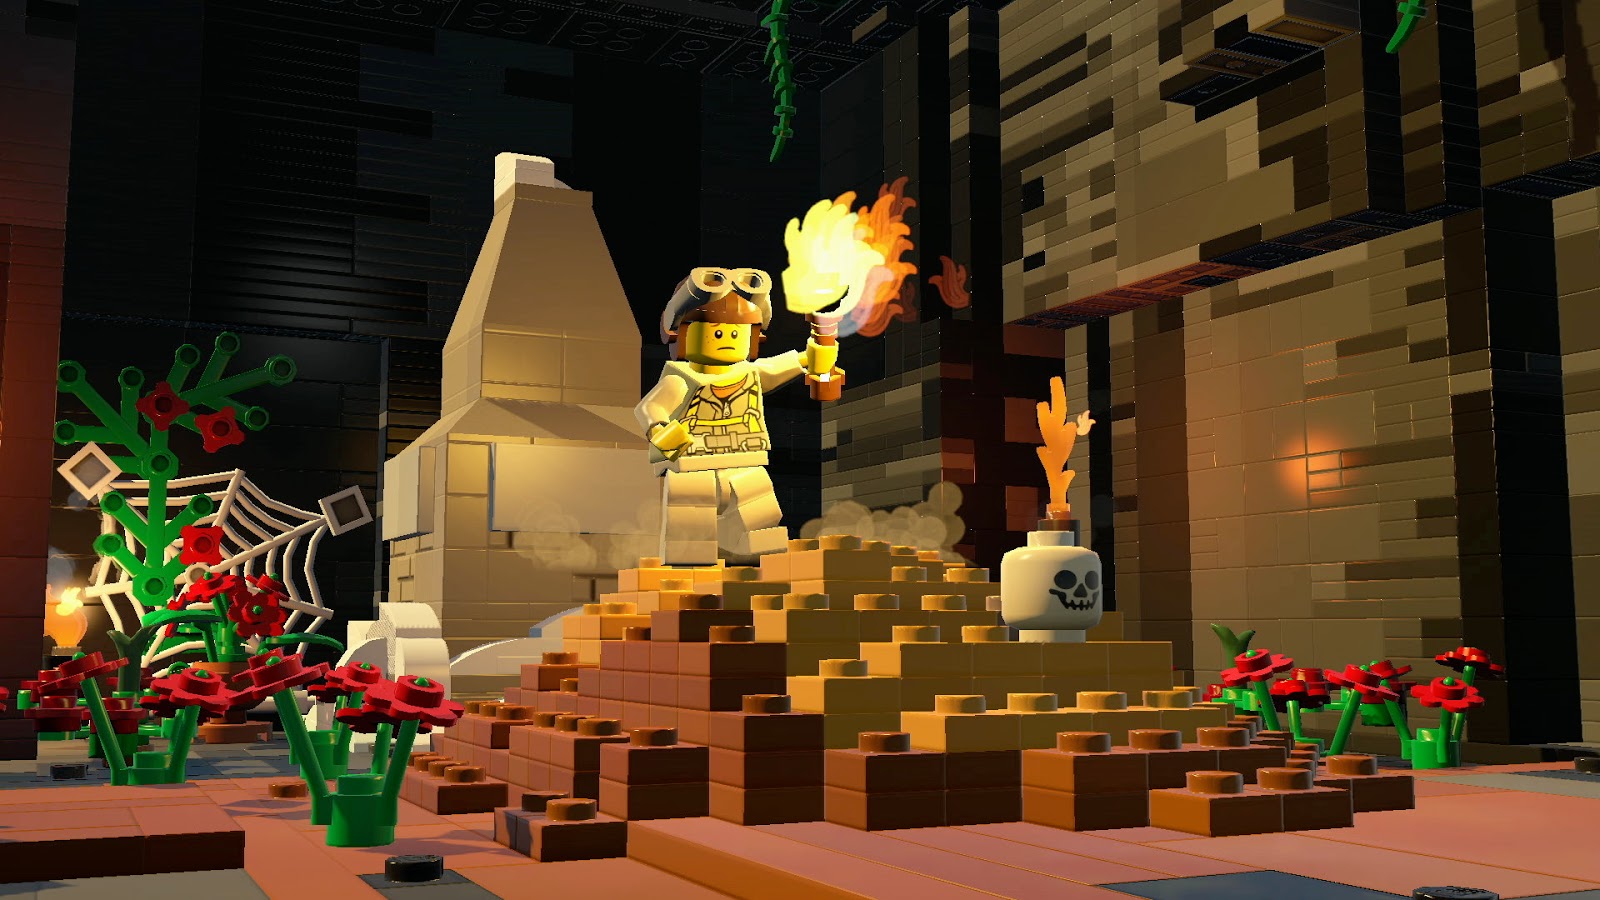 lego worlds pc game